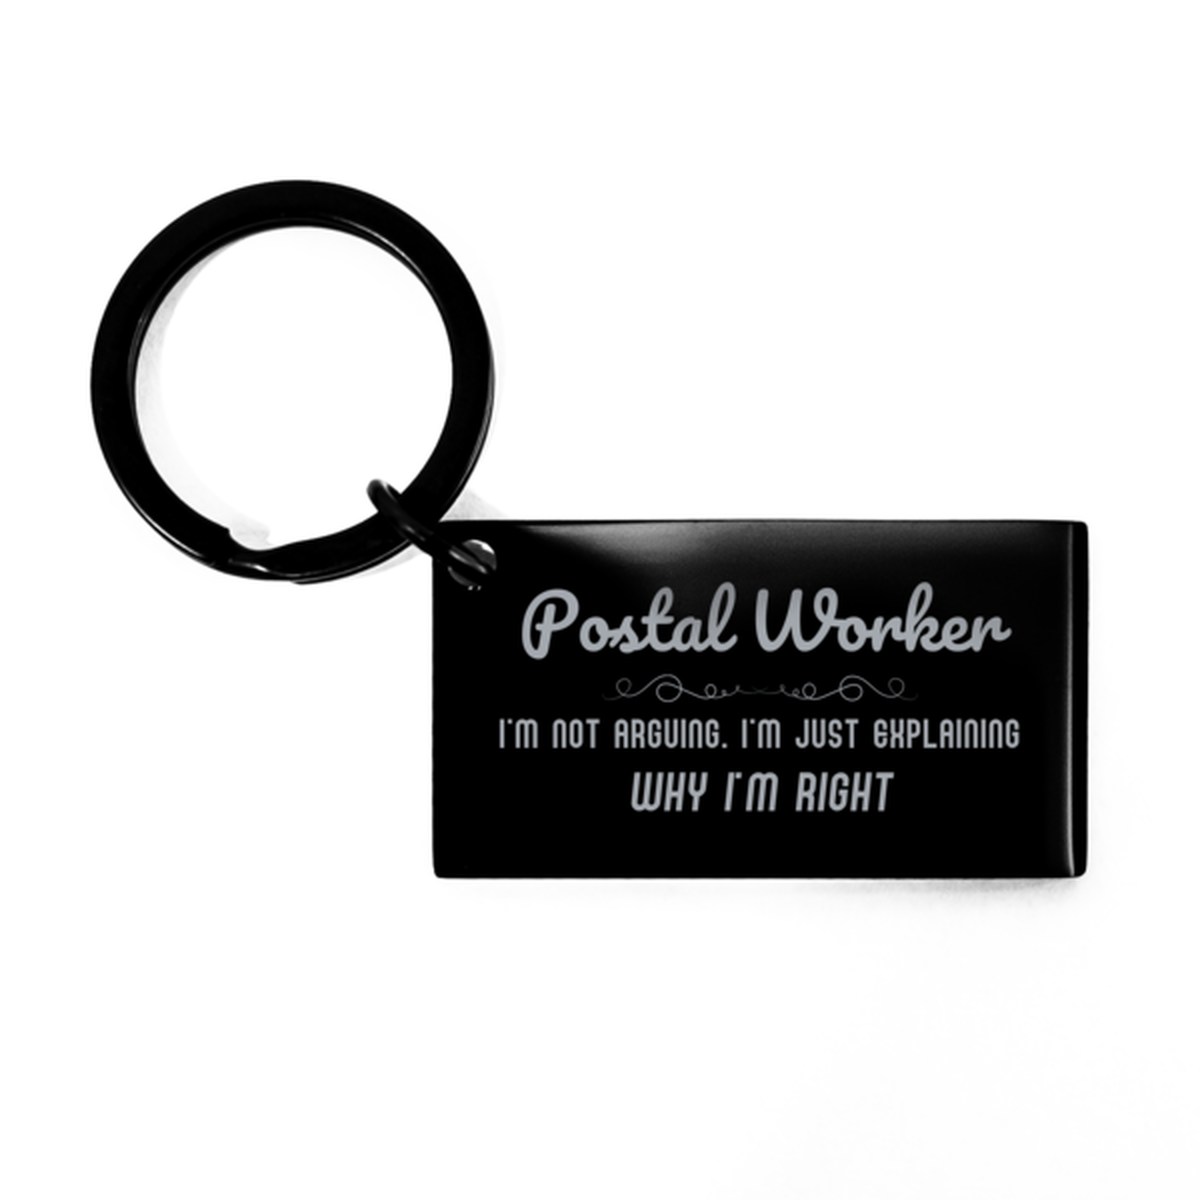 Postal Worker I'm not Arguing. I'm Just Explaining Why I'm RIGHT Keychain, Funny Saying Quote Postal Worker Gifts For Postal Worker Graduation Birthday Christmas Gifts for Men Women Coworker